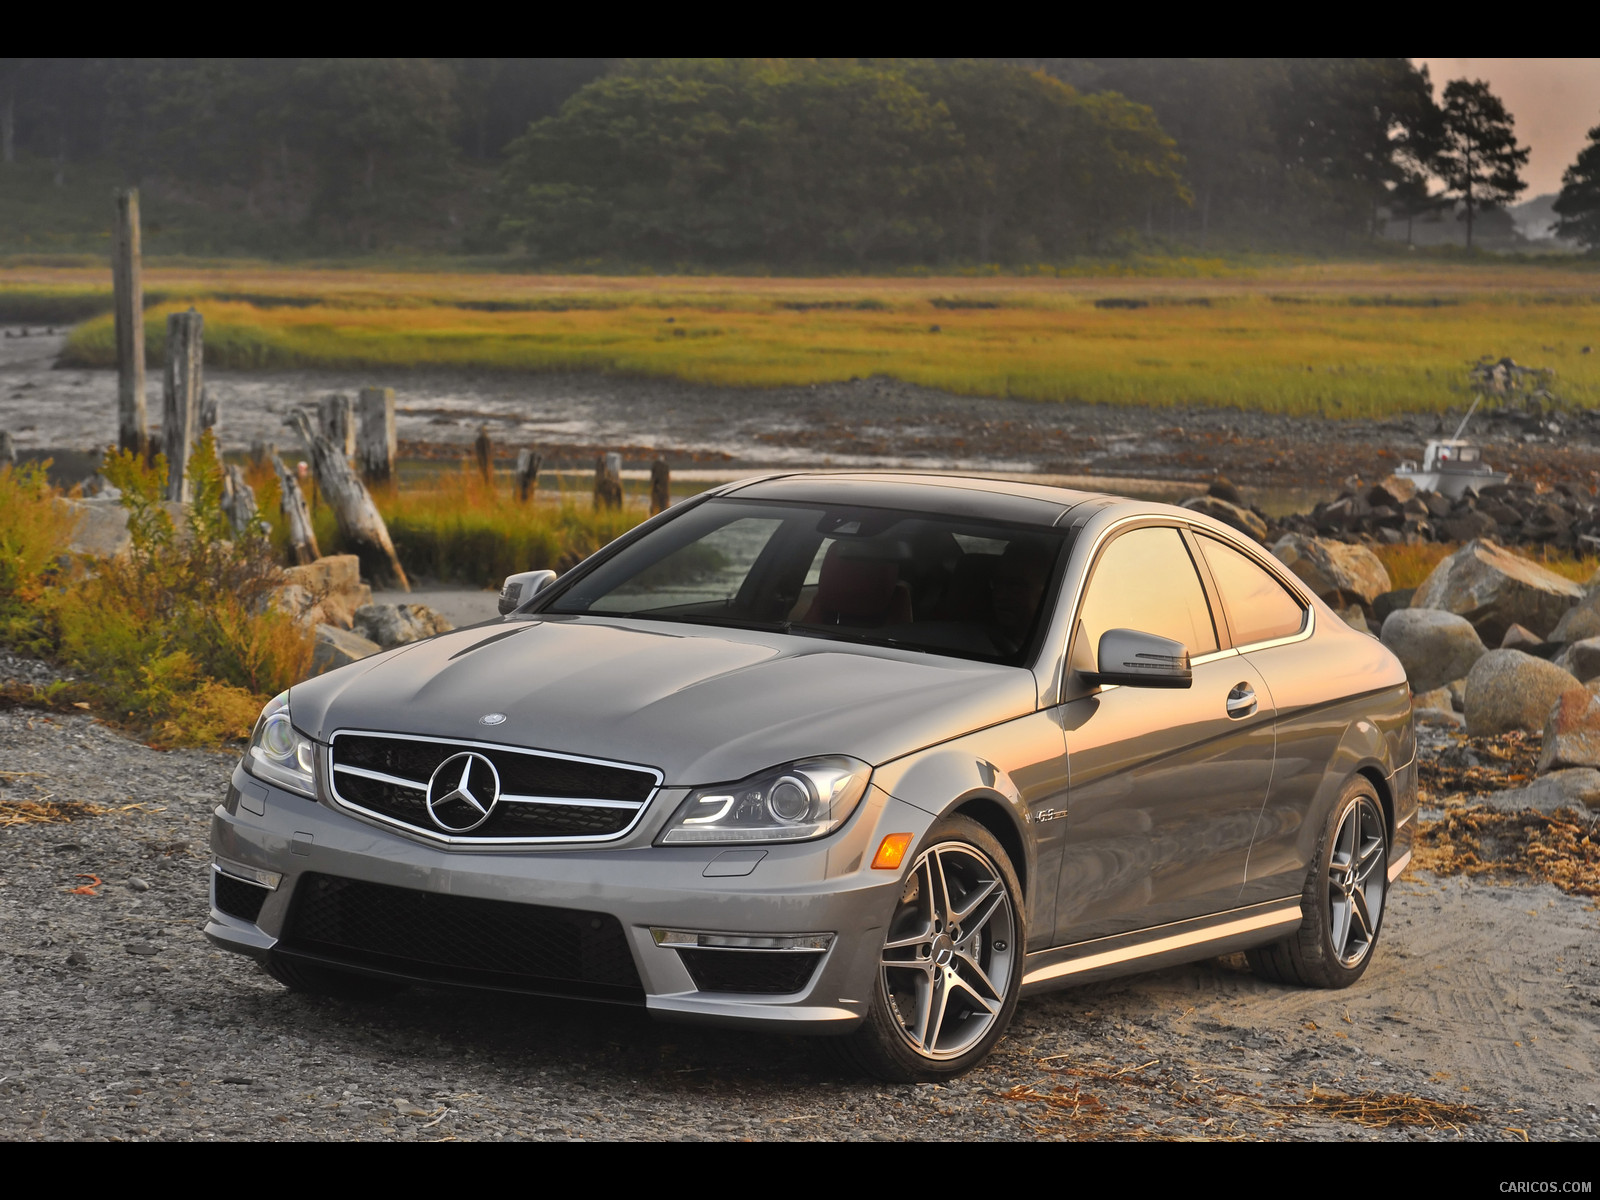 Mercedes-Benz C63 AMG Coupe (2012) with MCT transmission - , #2 of 64